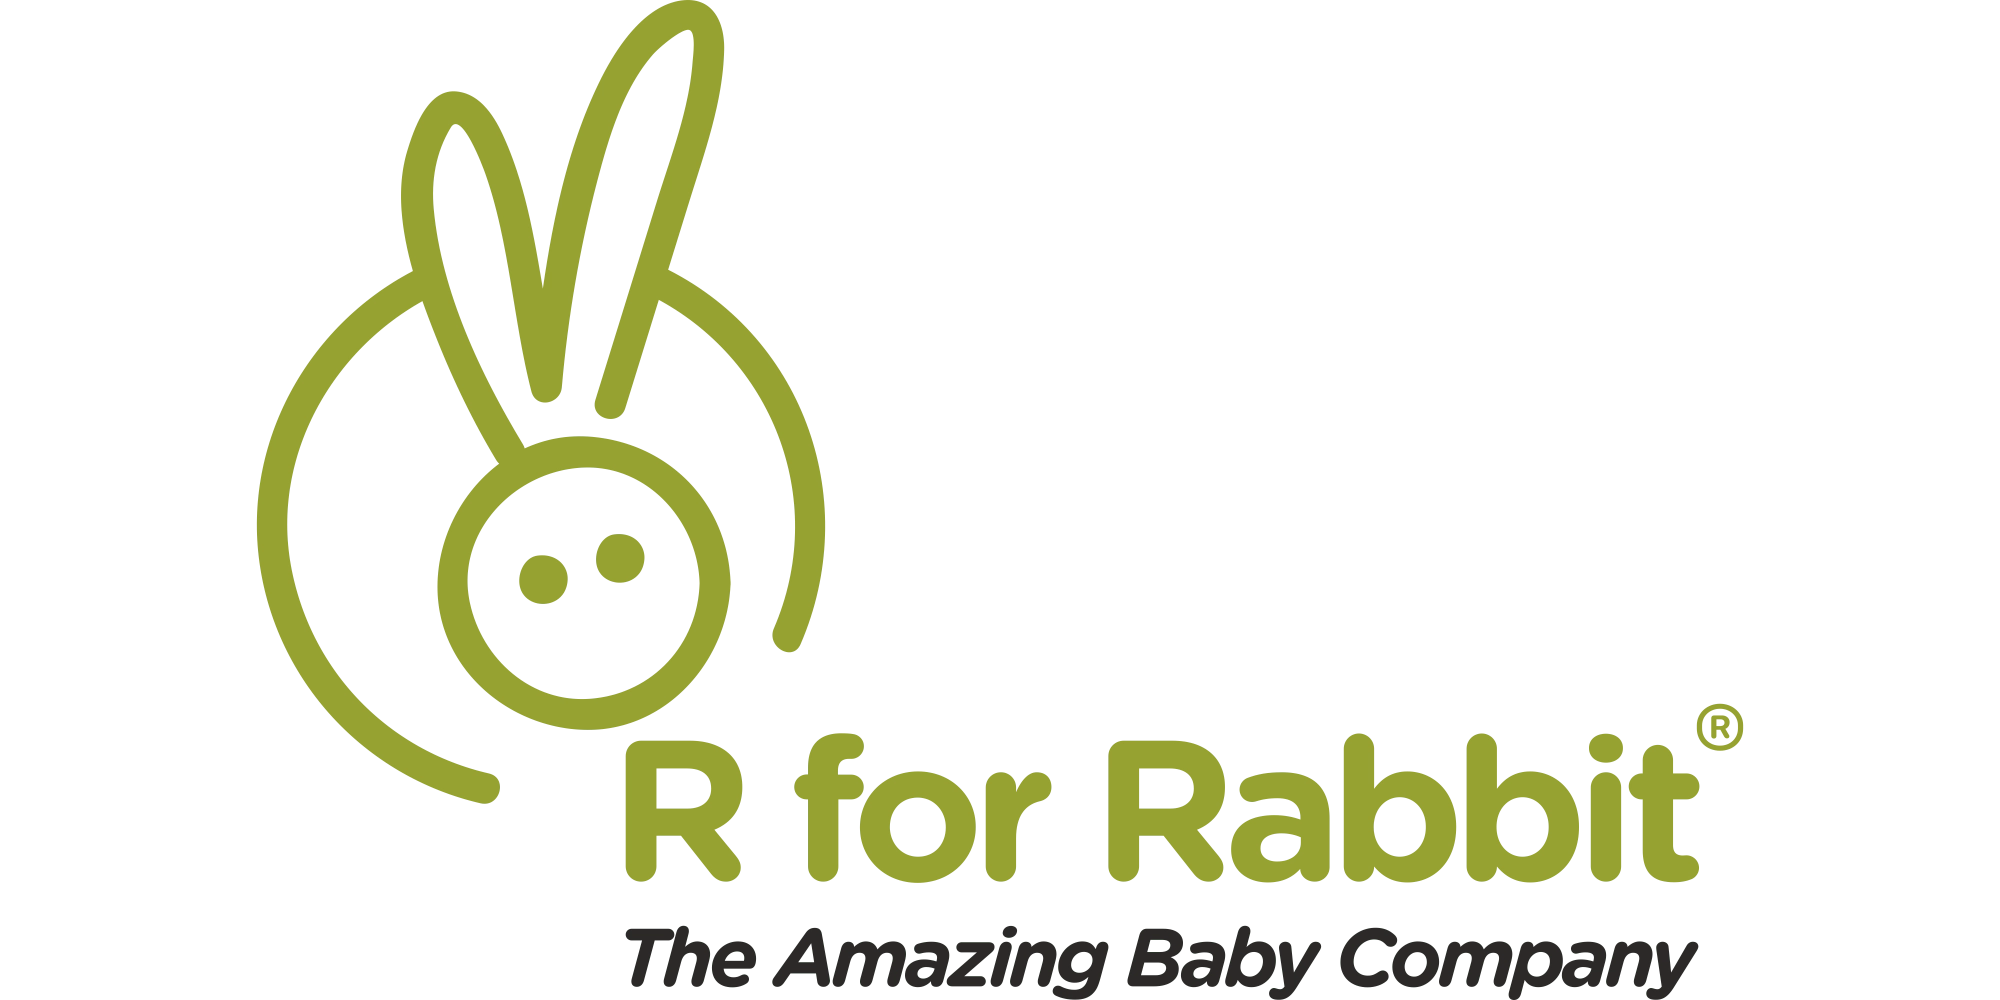 R for Rabbit Best Baby Products Brand in India